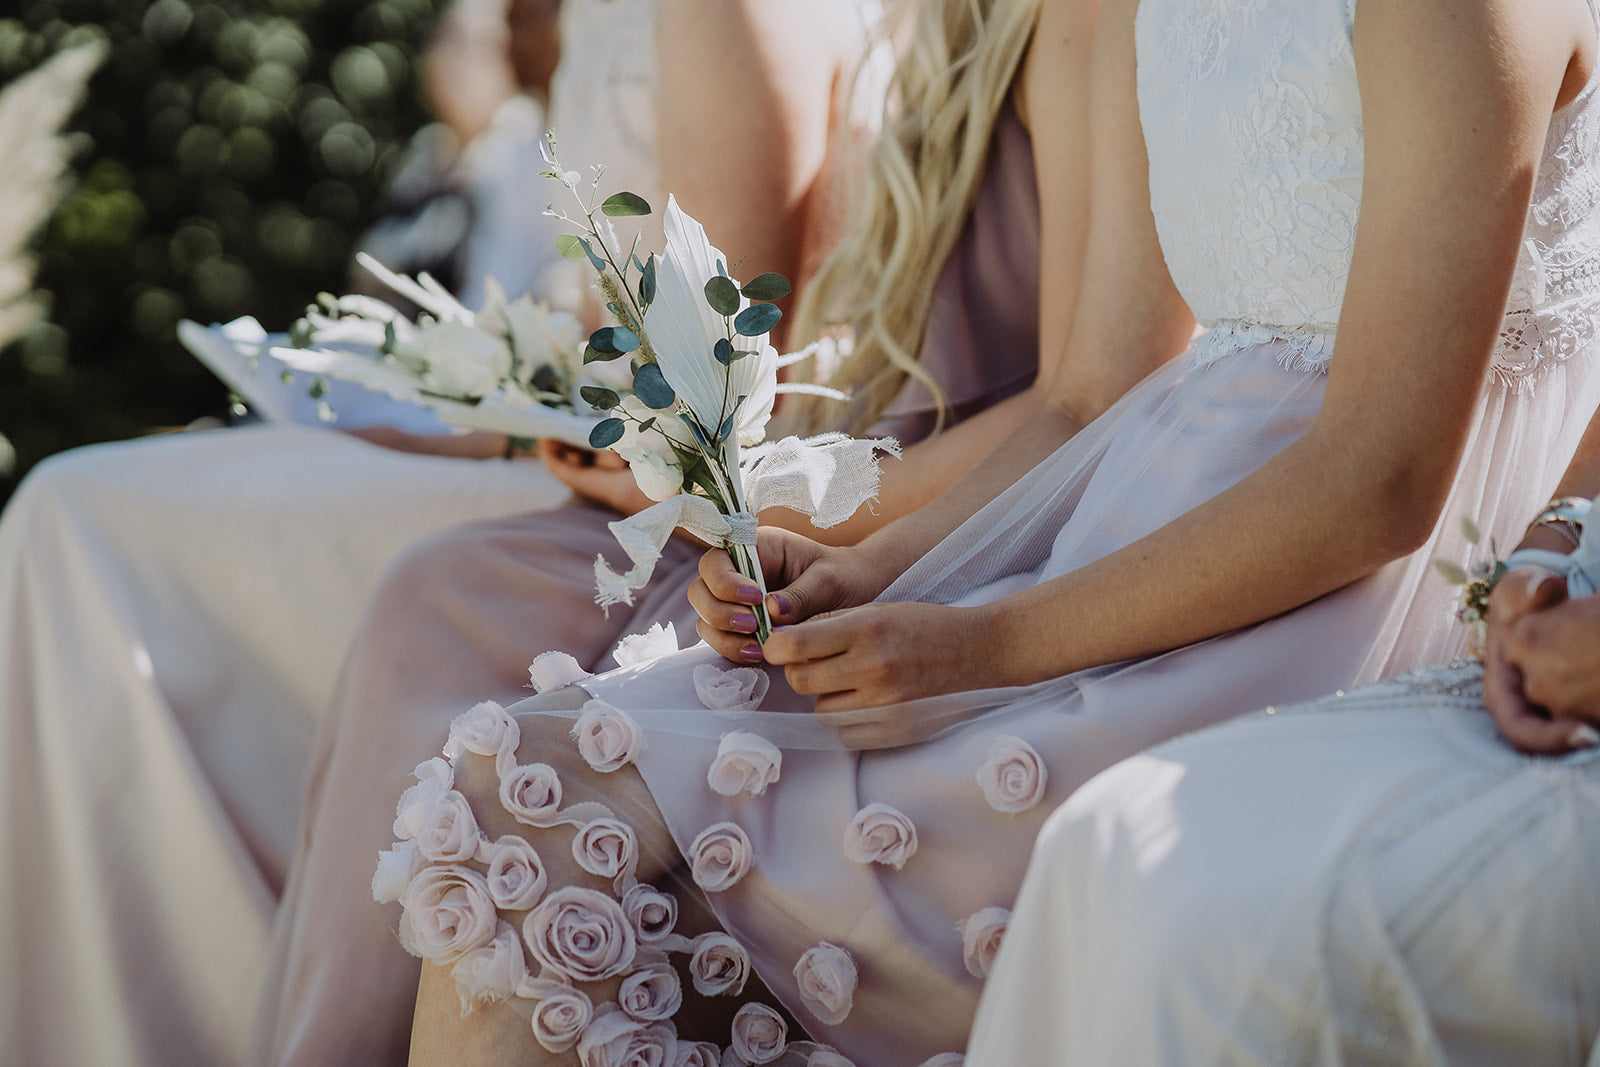 The Bridesmaid holds her flowers in hand. Her dress is embellished with fabric roses.